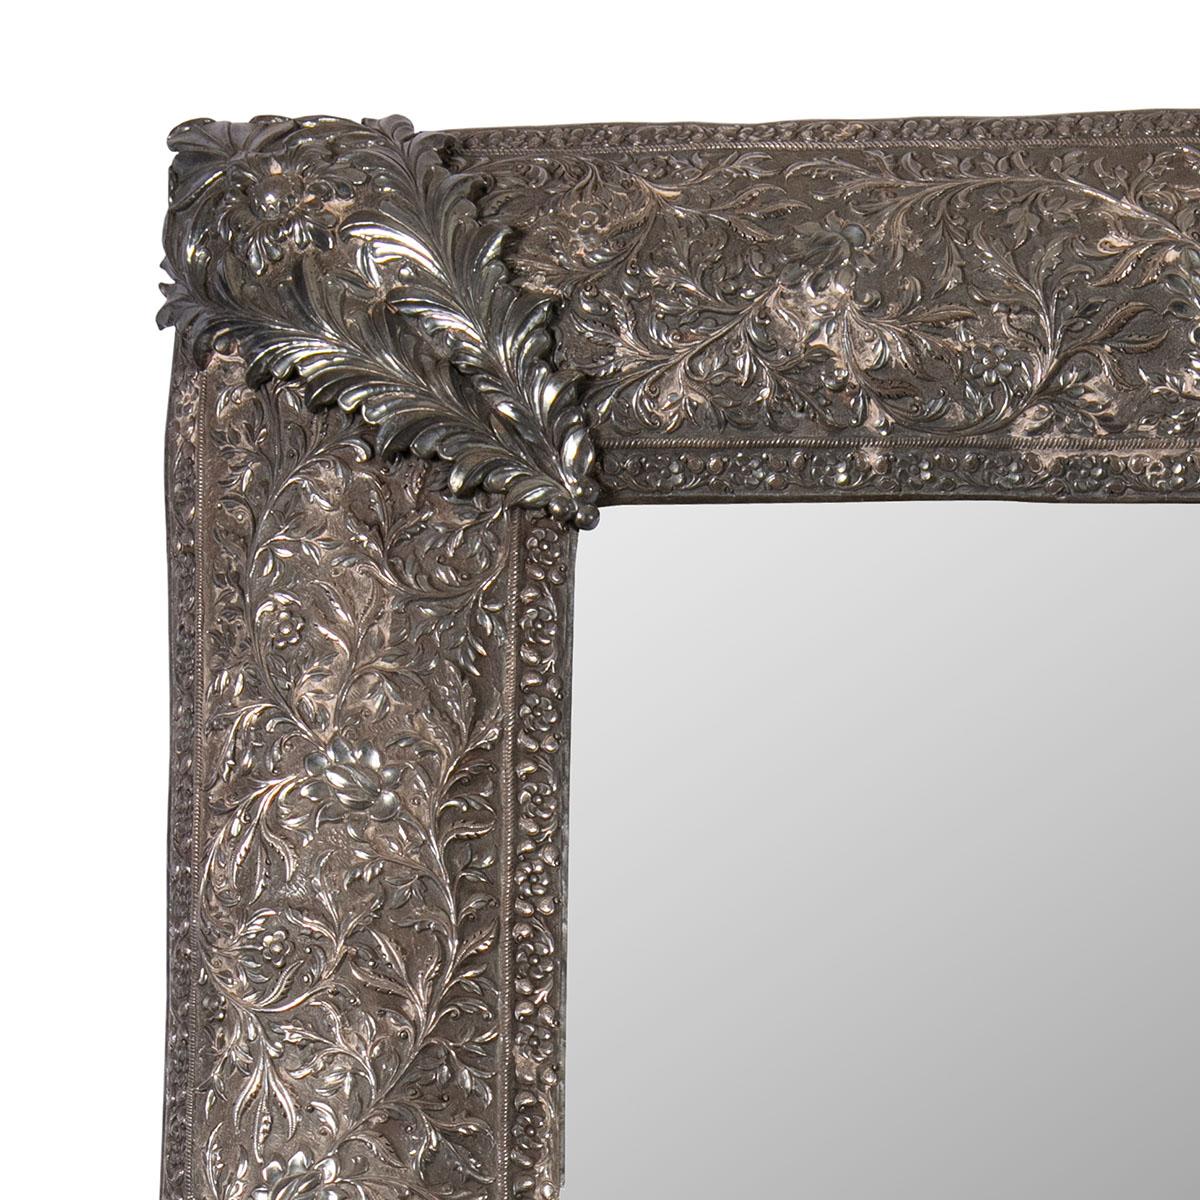 Anglo-Indian 19th Century Solid Silver Mughal Indian Repoussé Mirror Frame For Sale